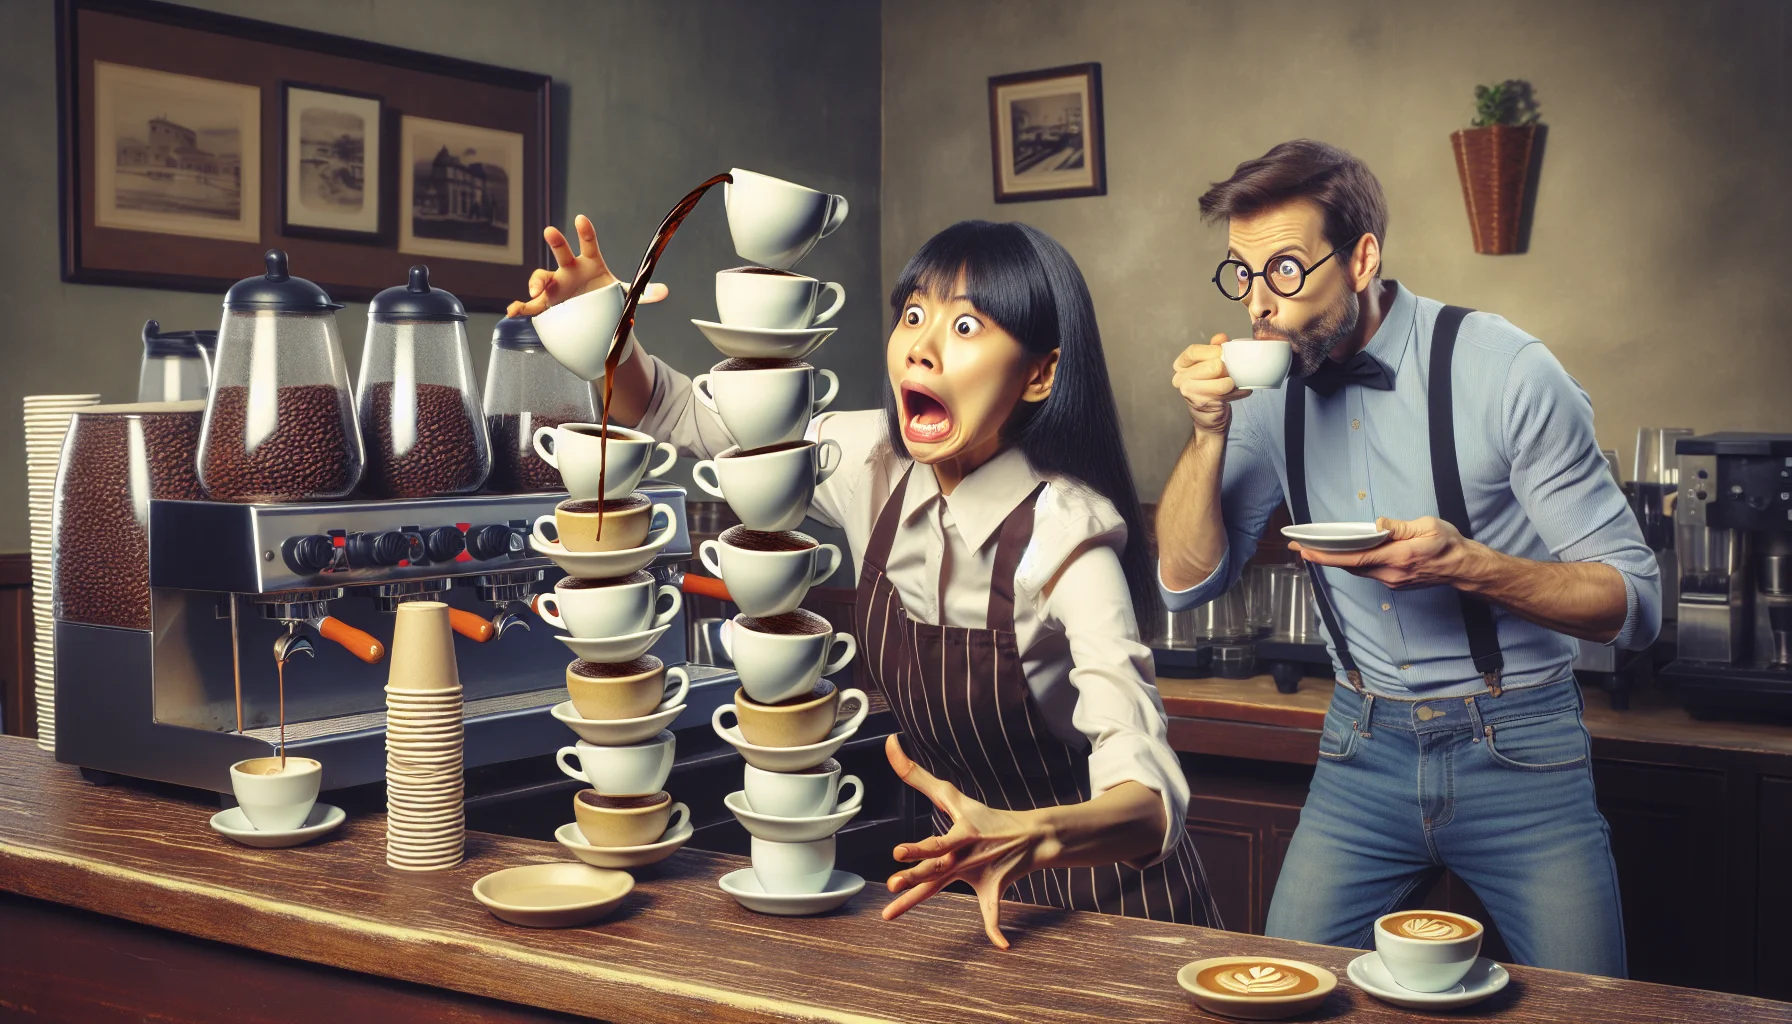 Create an image of a humorous scene inside a coffee shop. Envision a South Asian female barista attempting to balance multiple cups of coffee in a precarious manner, just on the verge of spilling but not quite there yet. She has wide eyes and an exaggerated expression of concentration as if performing a balancing act, immediately capturing attention. Next to her, a Caucasian man trying to sip his coffee nonchalantly yet unable to hide his amusement. With the coffee machines humming softly in the background, and the wonderful aroma of freshly brewed coffee filling the room, the scene is filled with inviting warmth and fun.